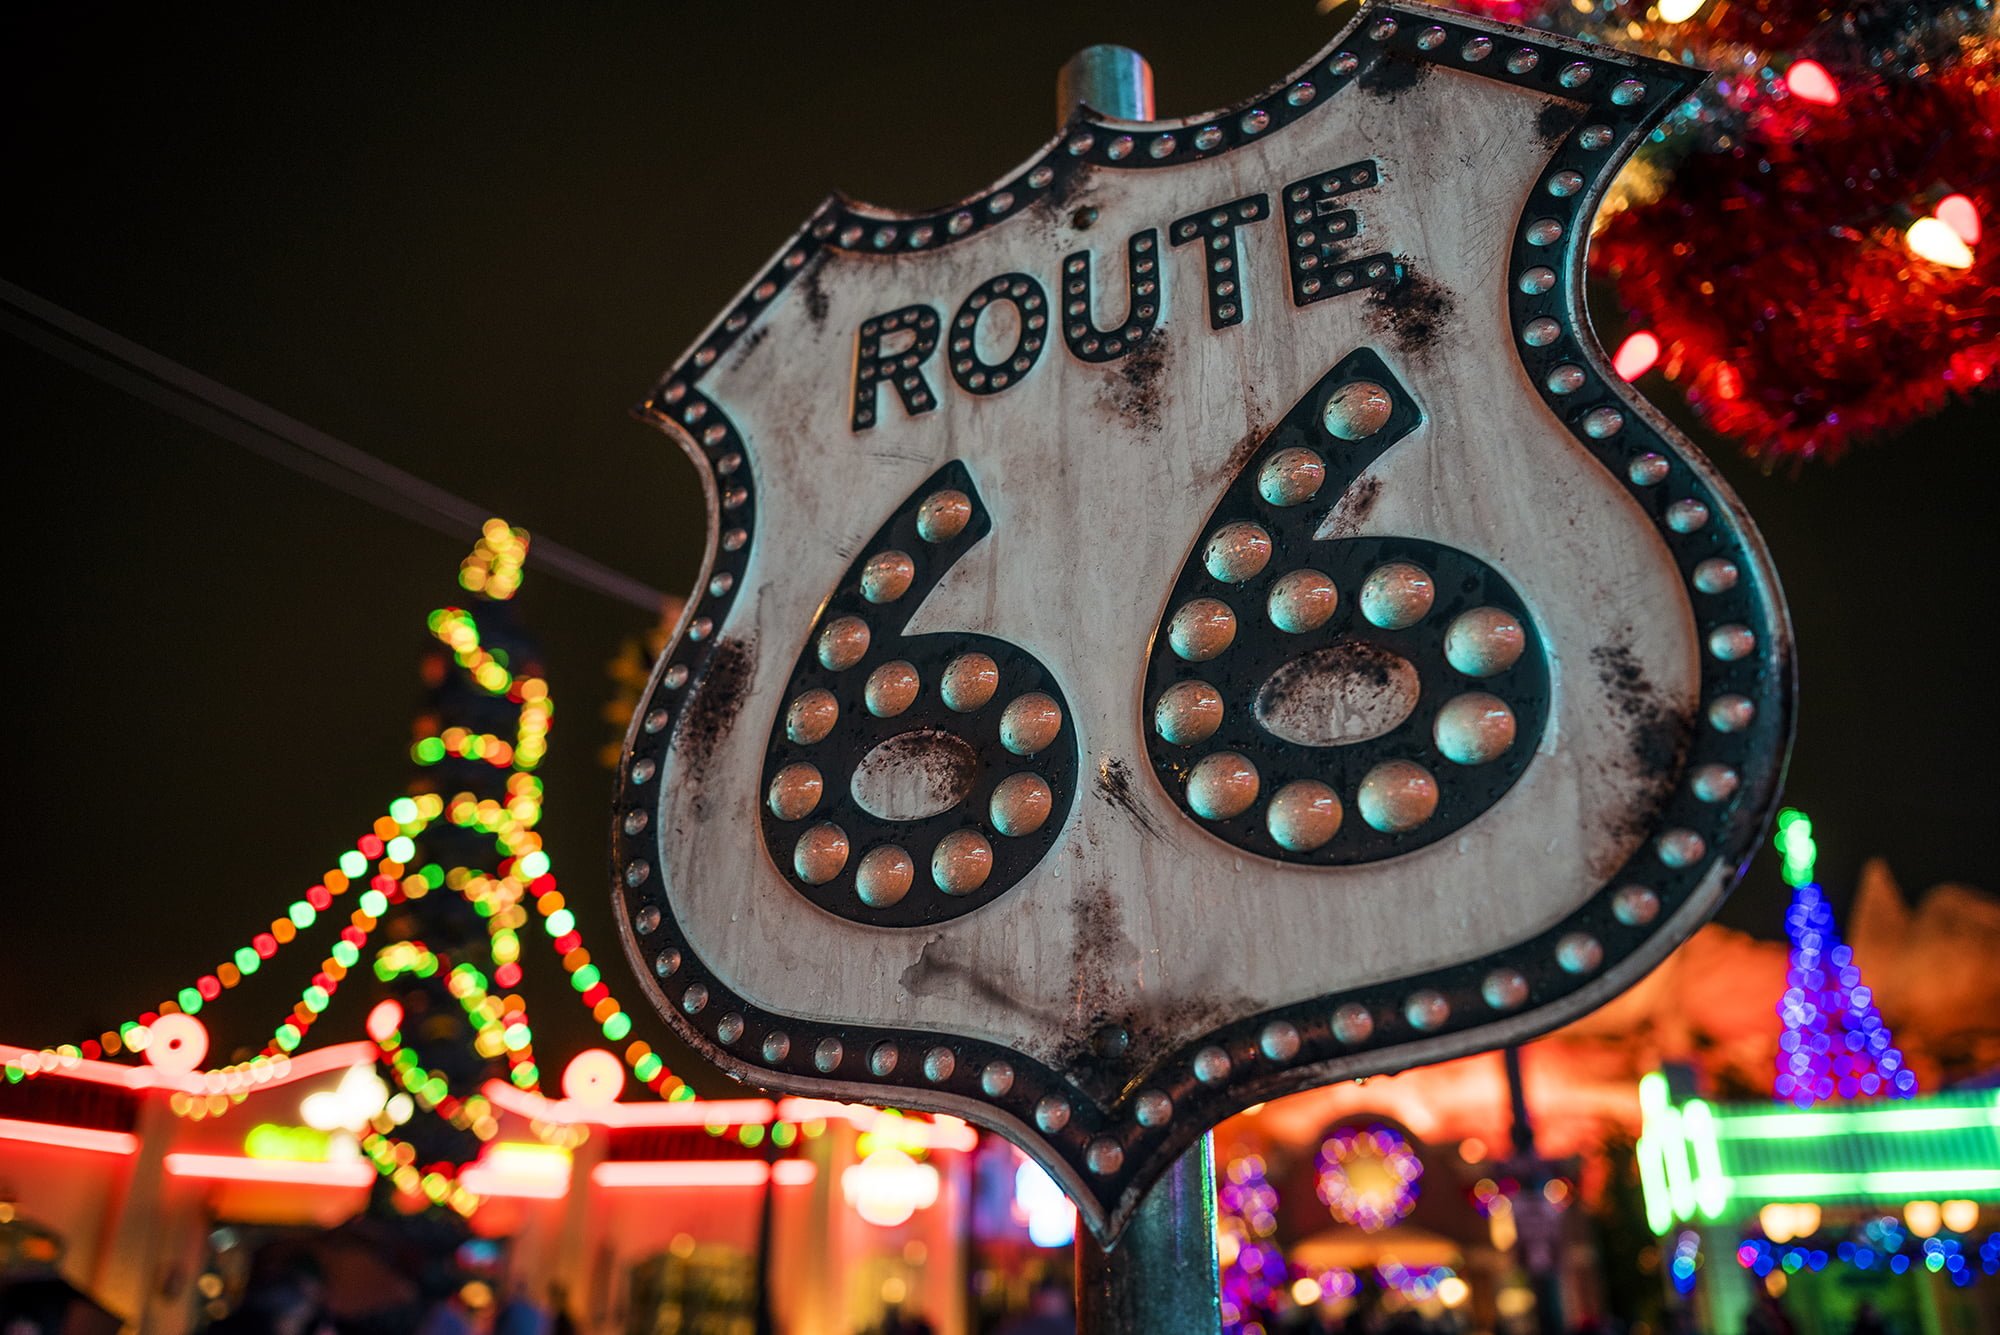 cars-land-route-66-sigma-24-35mm-f2